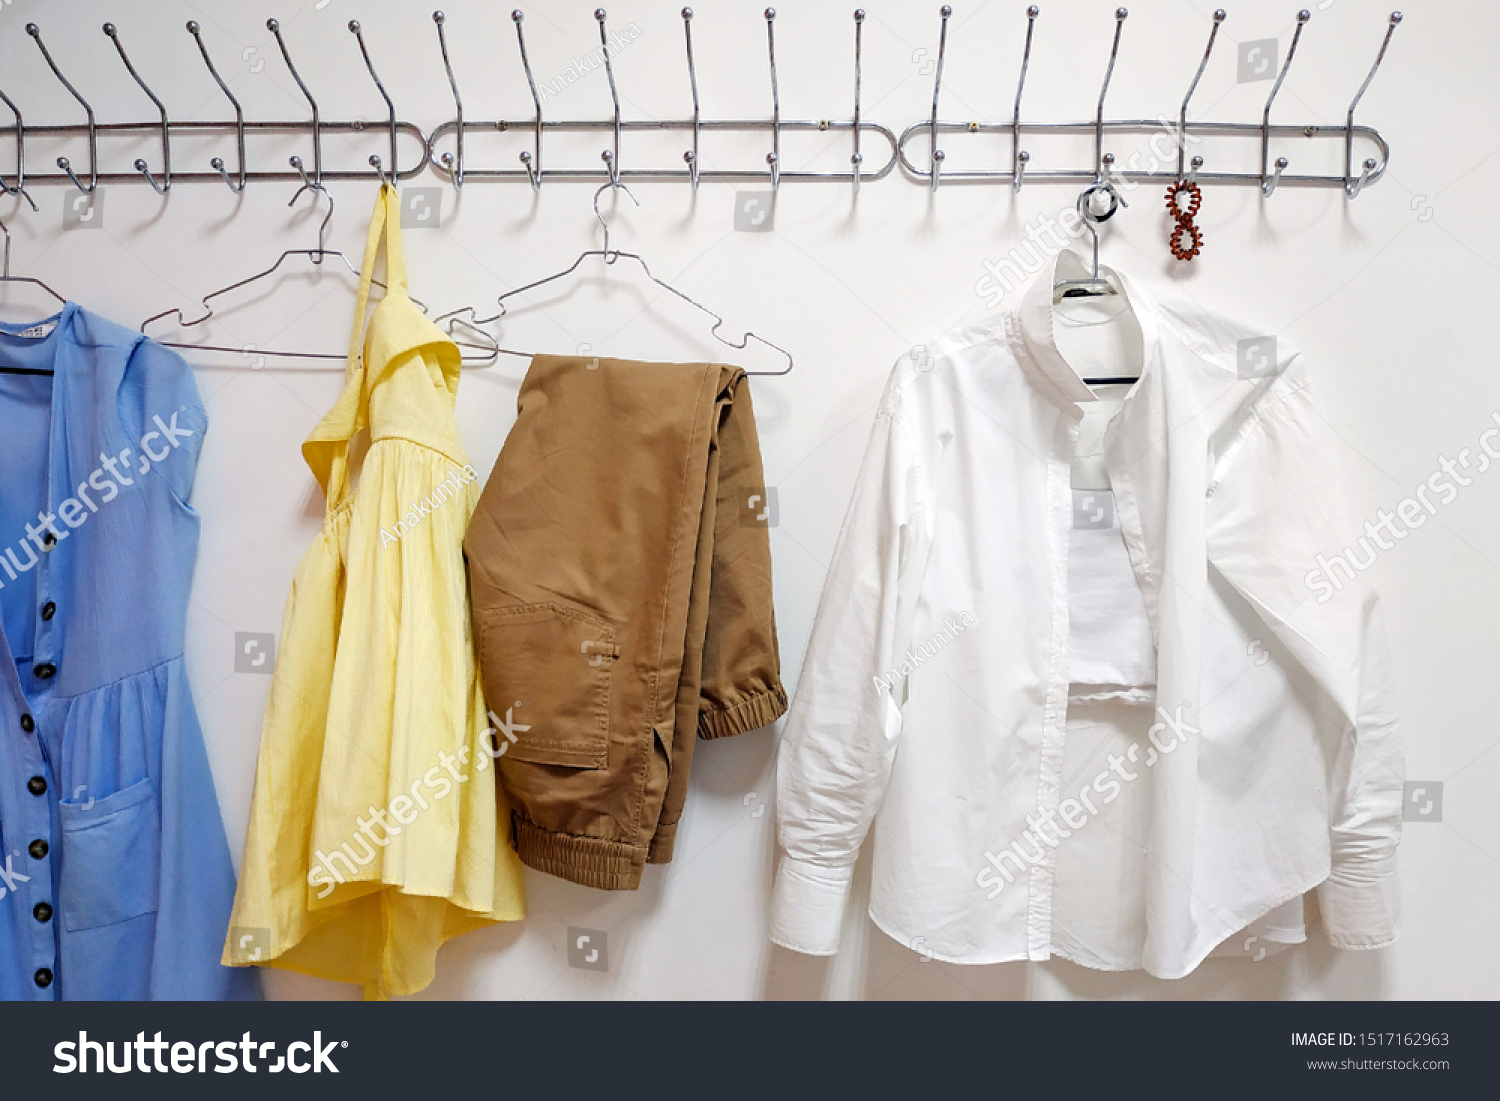 Metal hanger on a white wall. On a hanger are four trempels with clothes: a blue sundress, brown trousers, a white shirt, a yellow dress.  Multi-colored women's clothing, summer wardrobe #1517162963